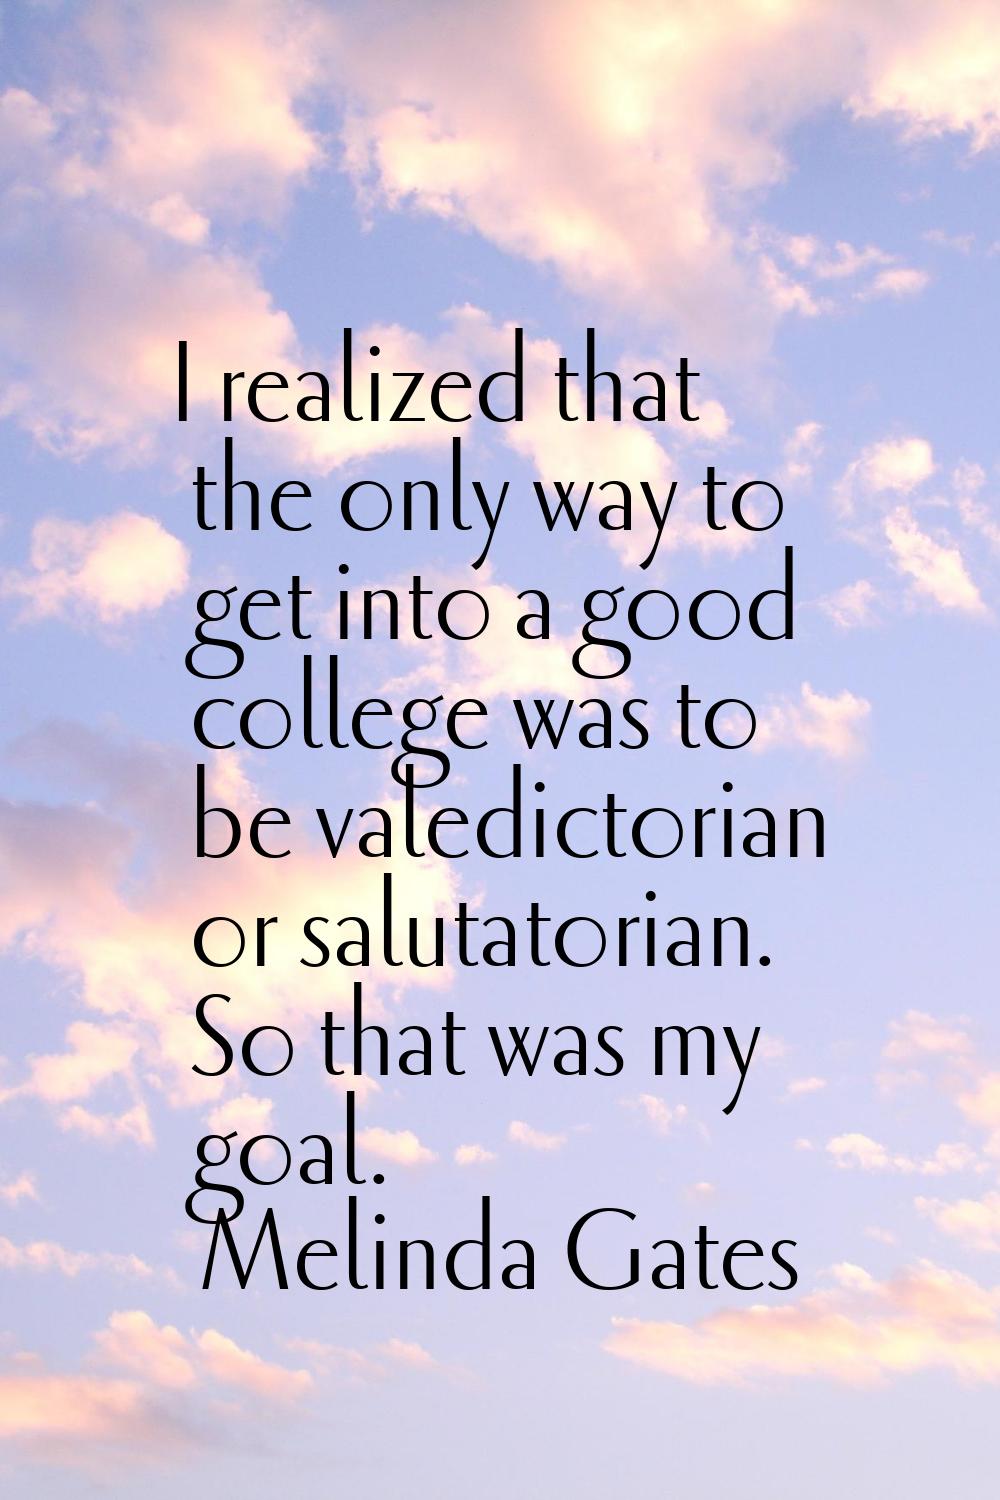 I realized that the only way to get into a good college was to be valedictorian or salutatorian. So